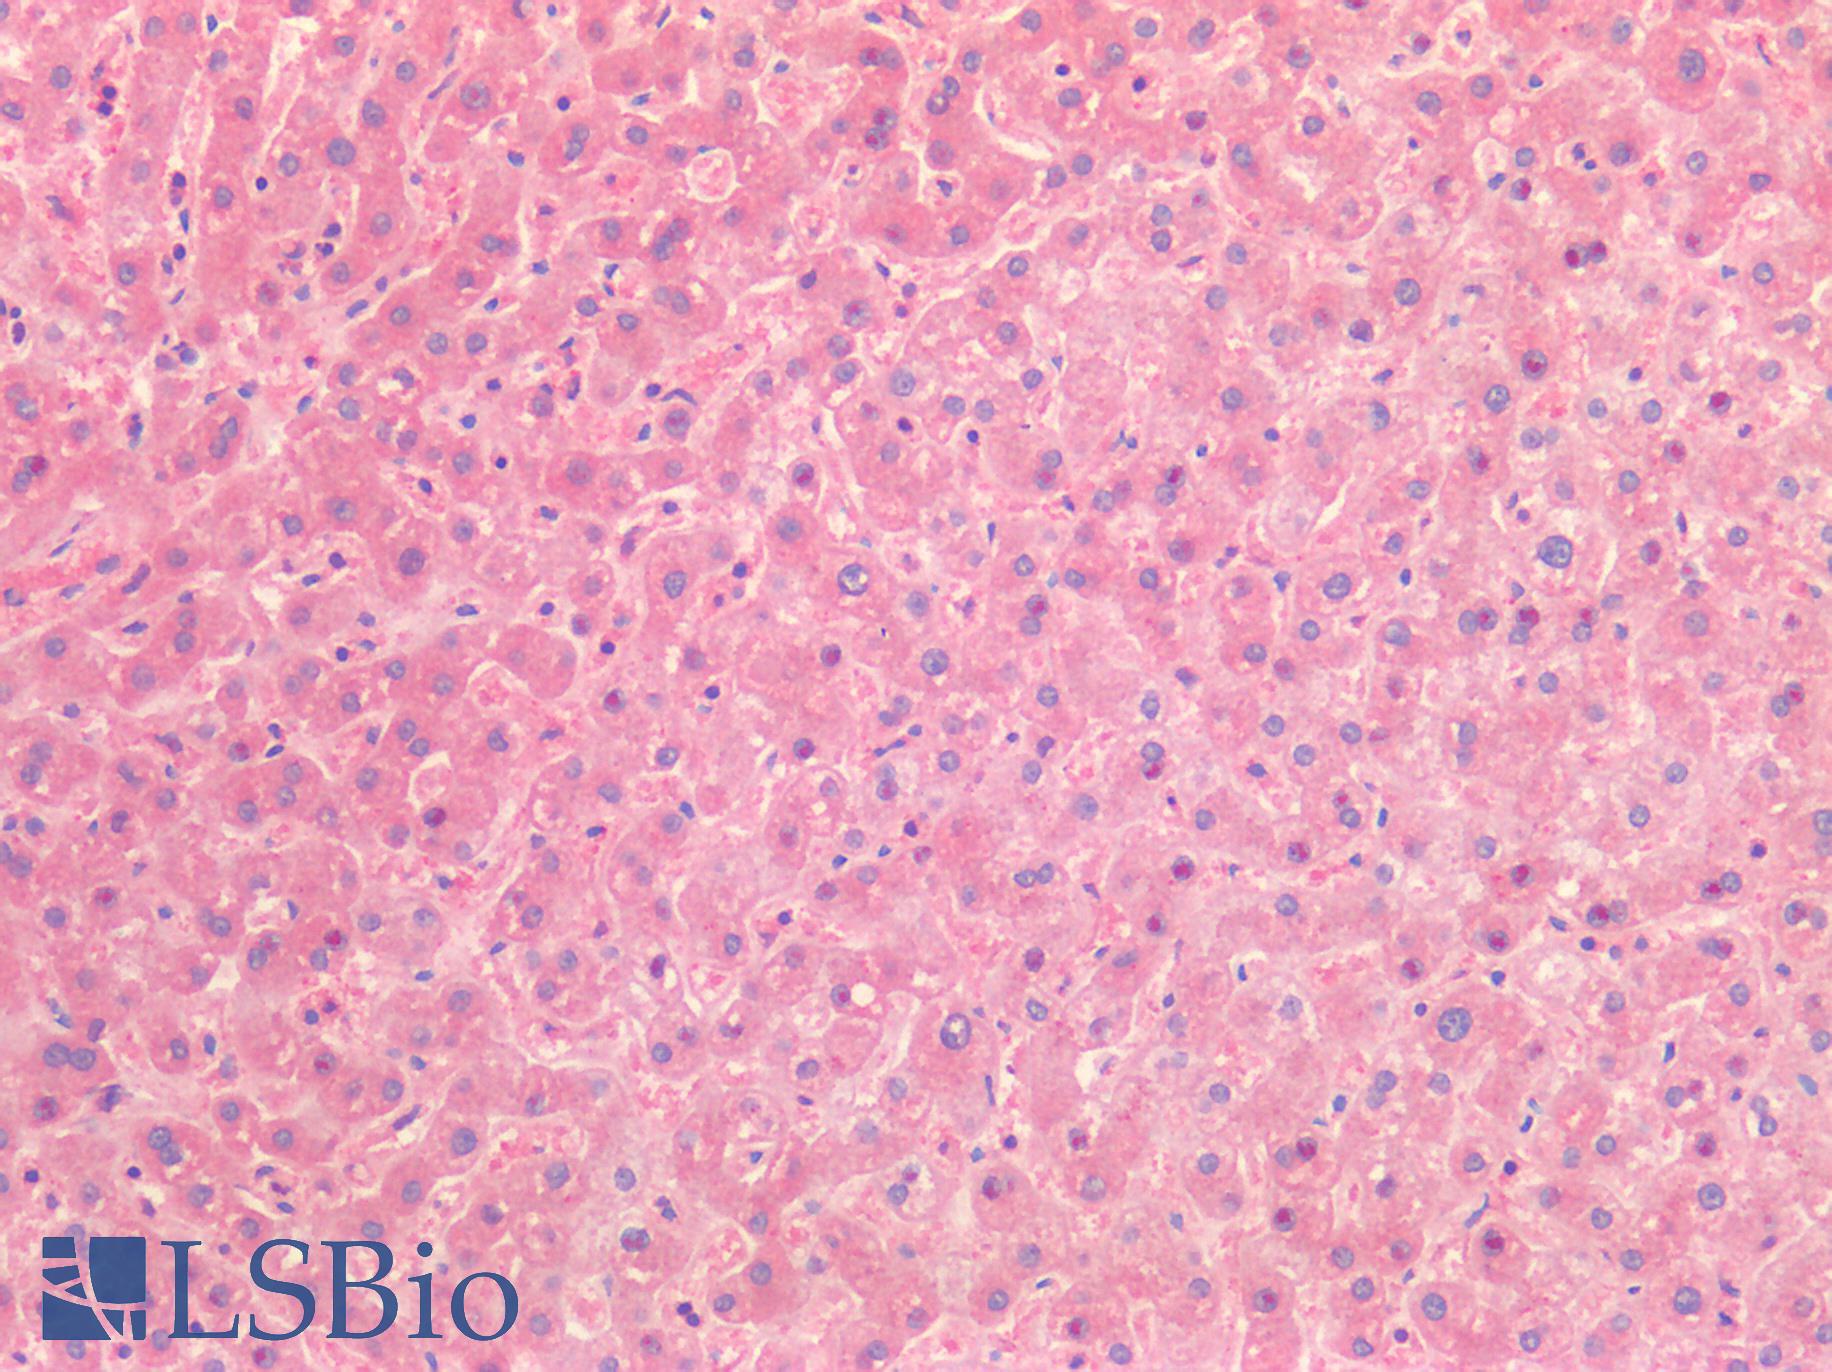 HGF / Hepatocyte Growth Factor Antibody - Human Liver: Formalin-Fixed, Paraffin-Embedded (FFPE)